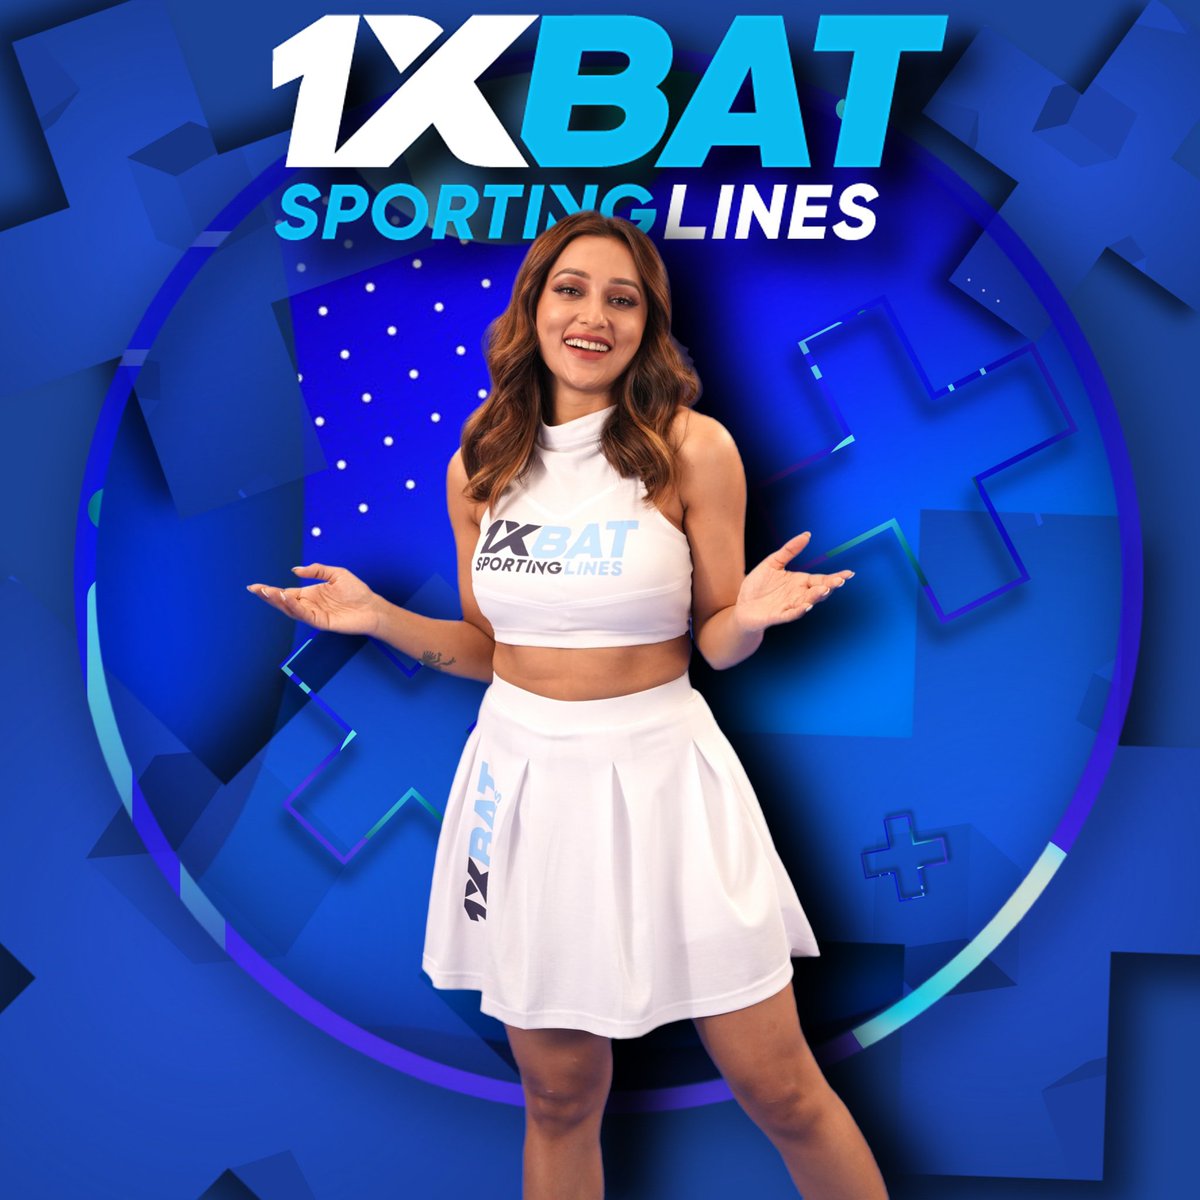 If you are a true fan of cricket, then I advise you to check 𝟭𝘅𝗕𝗮𝘁 𝗦𝗽𝗼𝗿𝘁𝗶𝗻𝗴 𝗟𝗶𝗻𝗲𝘀 sportswear! 
Unique branded cricket bats and jerseys!

Shop on 1xbatsporting.com and Amazon!

@1xBatSporting

#1xbatsportinglines
#1xbatsportswear